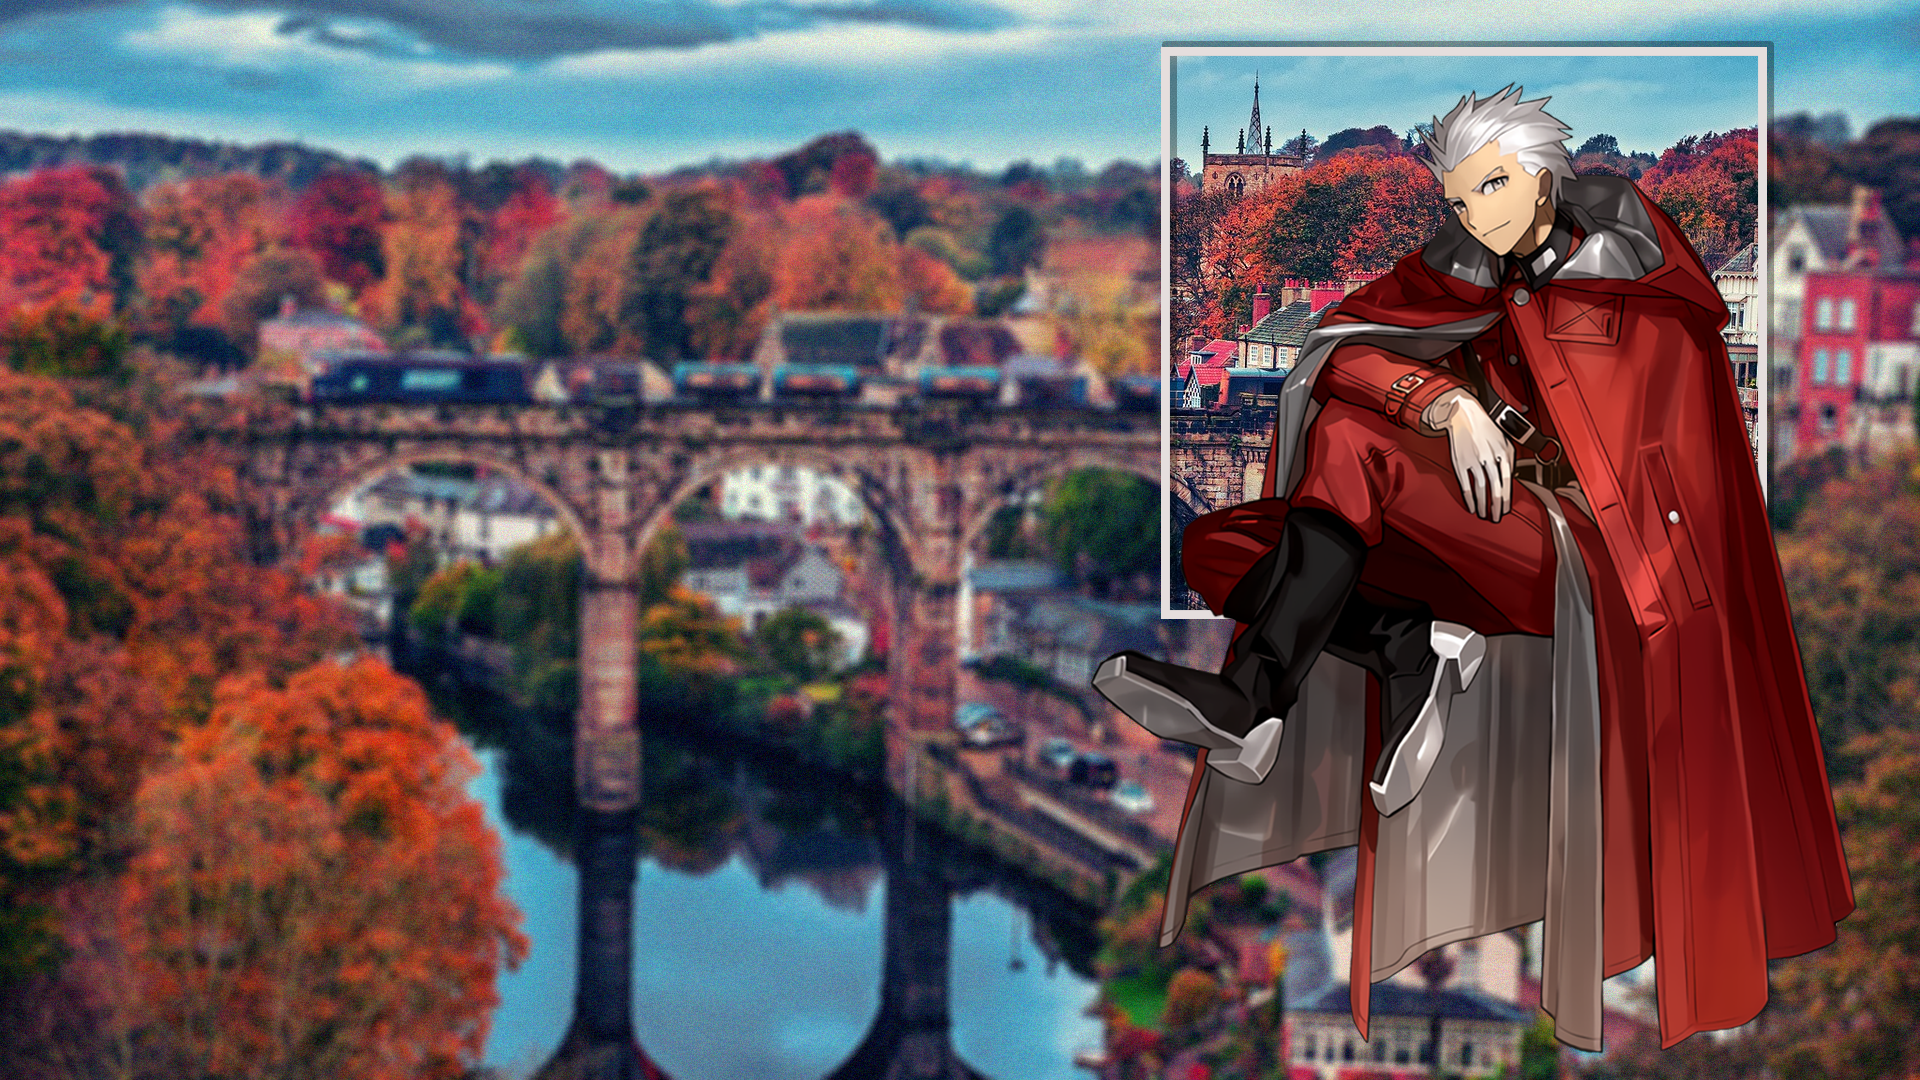 Anime 1920x1080 Fate series picture-in-picture city Fate/Extra Fate/Extra CCC anime boys Shirou Emiya Archer (Fate/Stay Night)